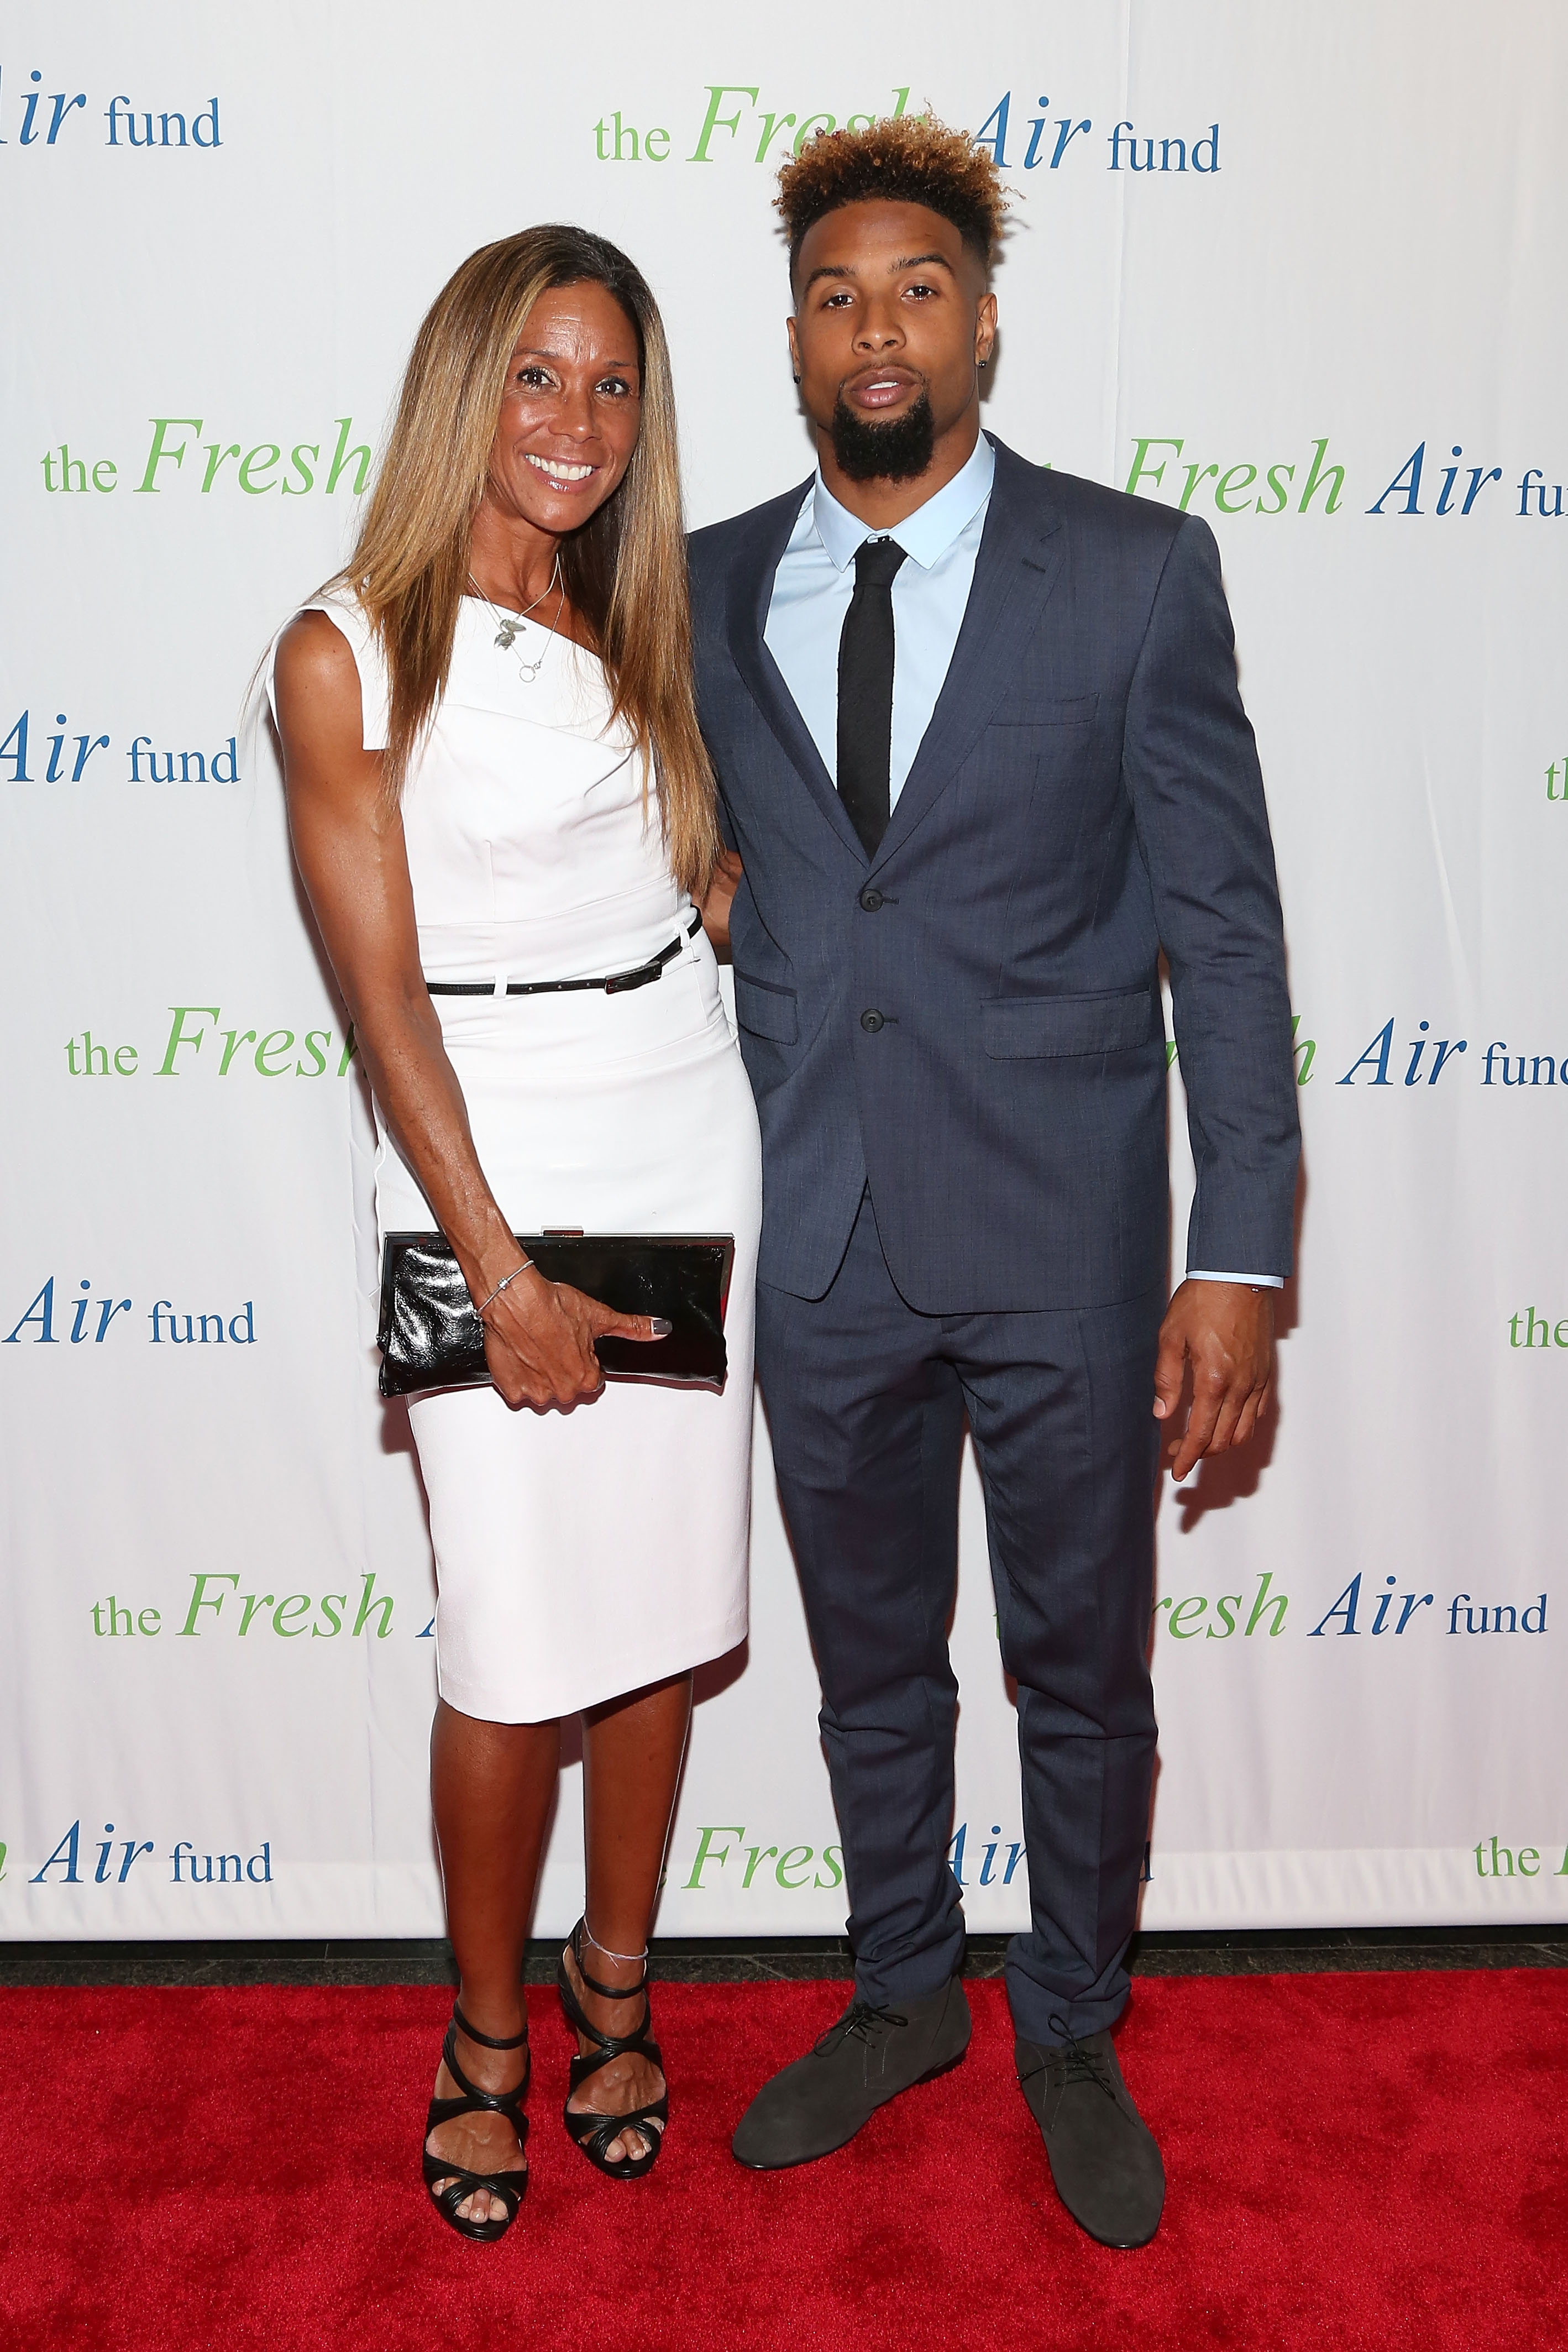 Heather Van Norman and Odell Beckham, Jr. at the 2015 Fresh Air Fund's Salute To American Heroes on May 28, 2015 in New York City. I Source: Getty Images.